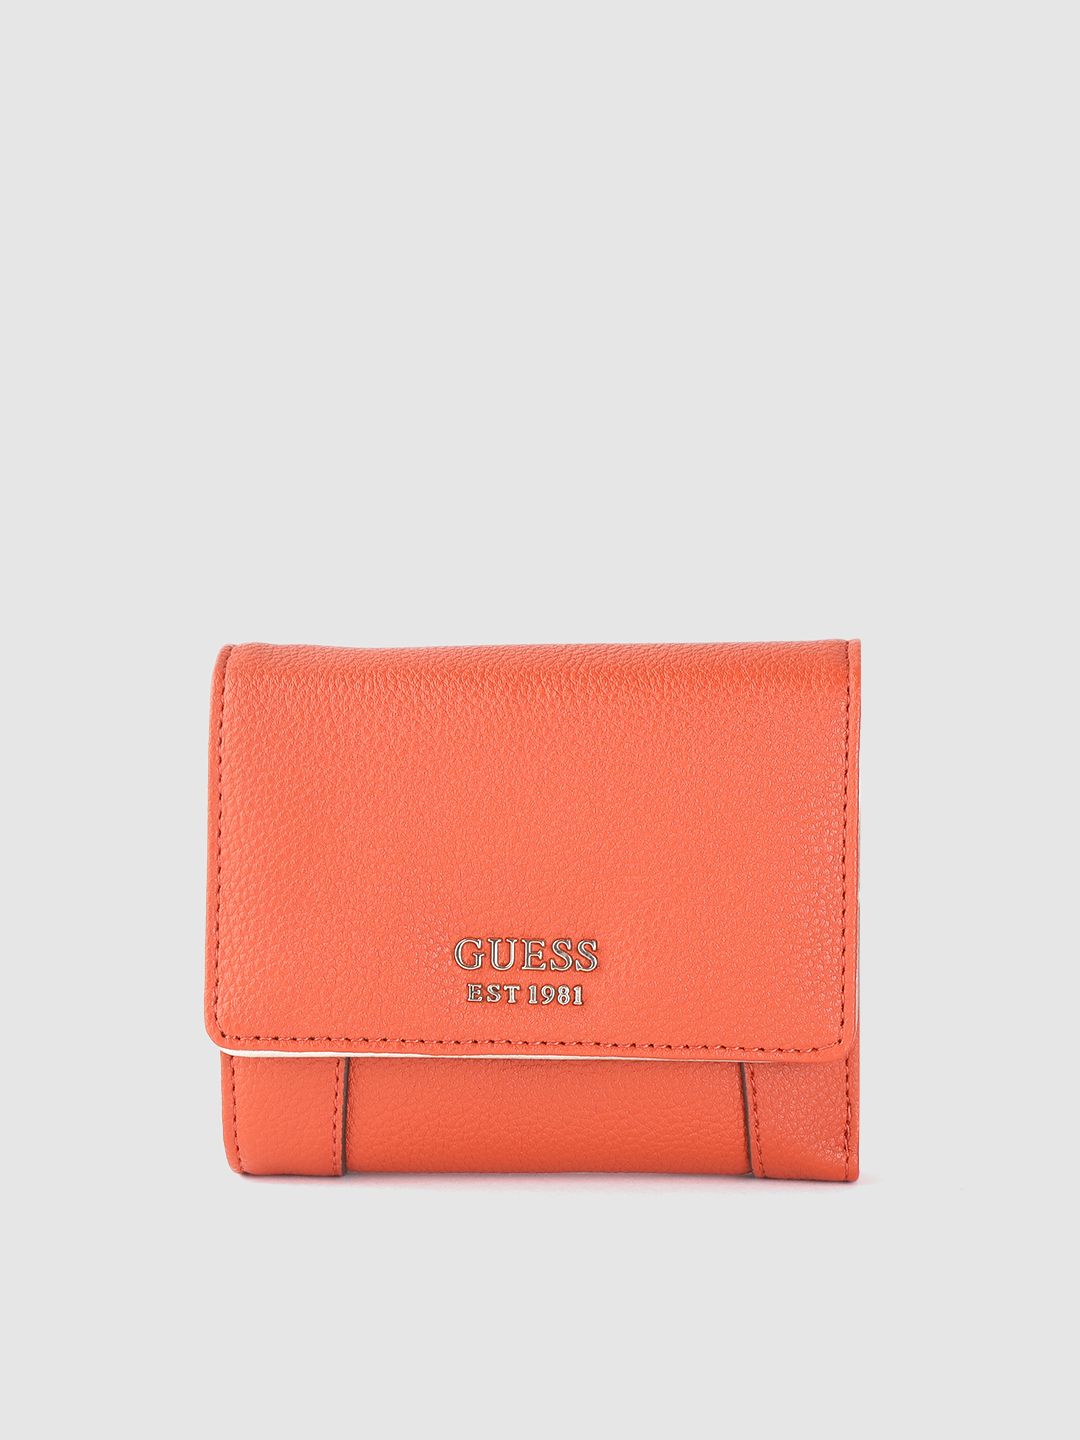 GUESS Women Orange Grainy Textured Three Fold Wallet Price in India